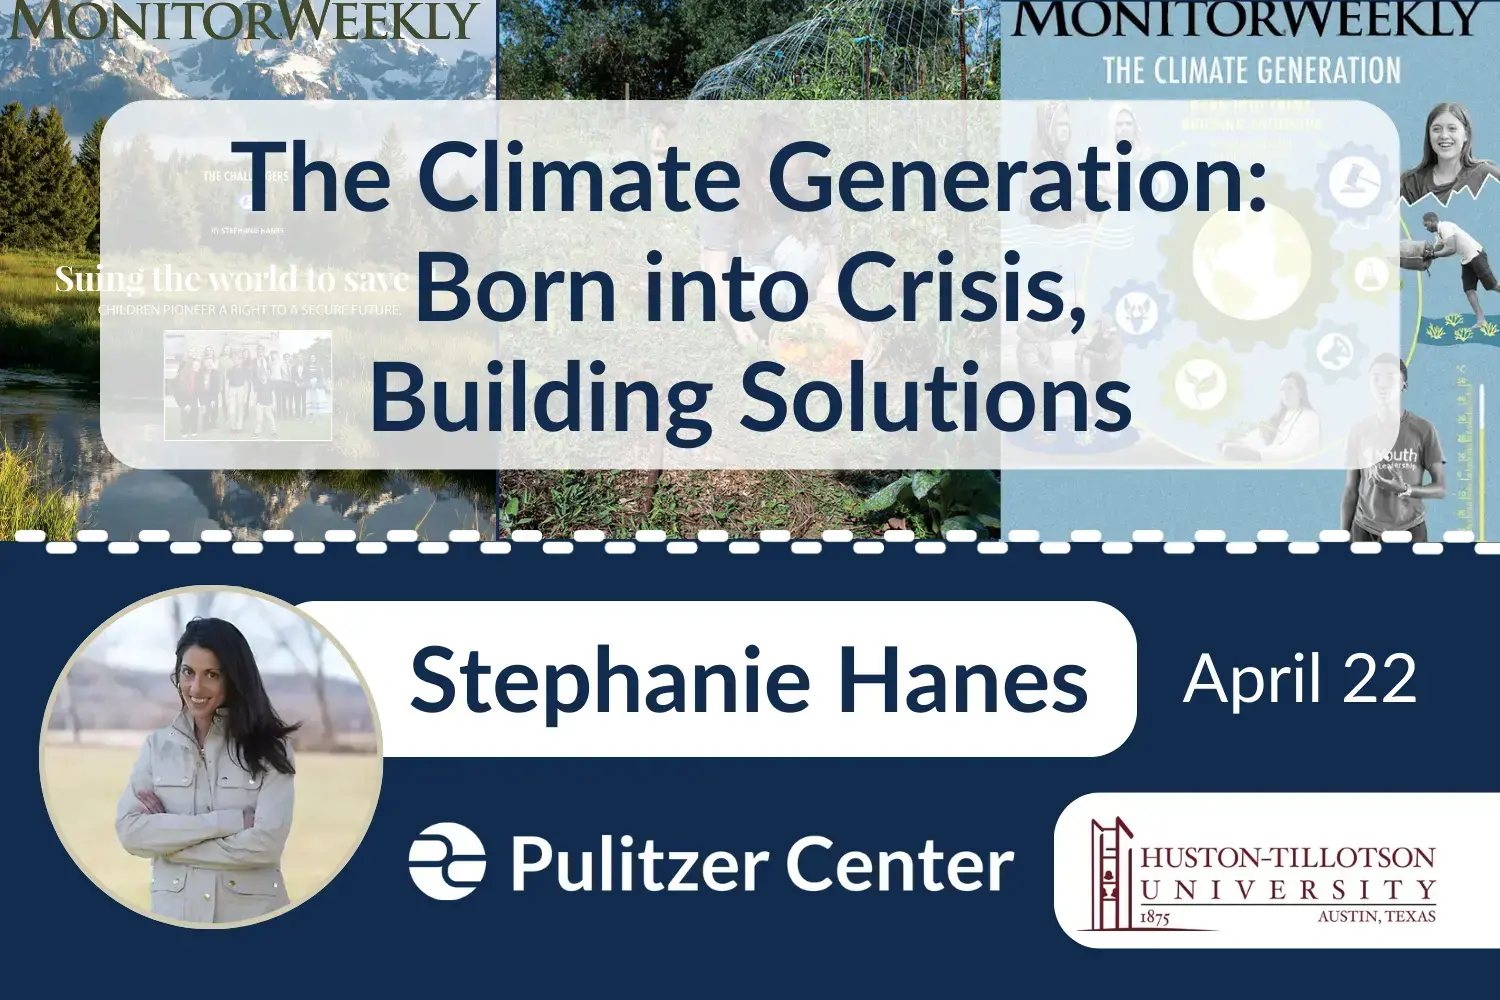 Flyer text: Stephanie Hanes visits Hutson Tillotson University April 22 to discuss her project 'The Climate Generation: Born Into Crisis, Building Solutions'